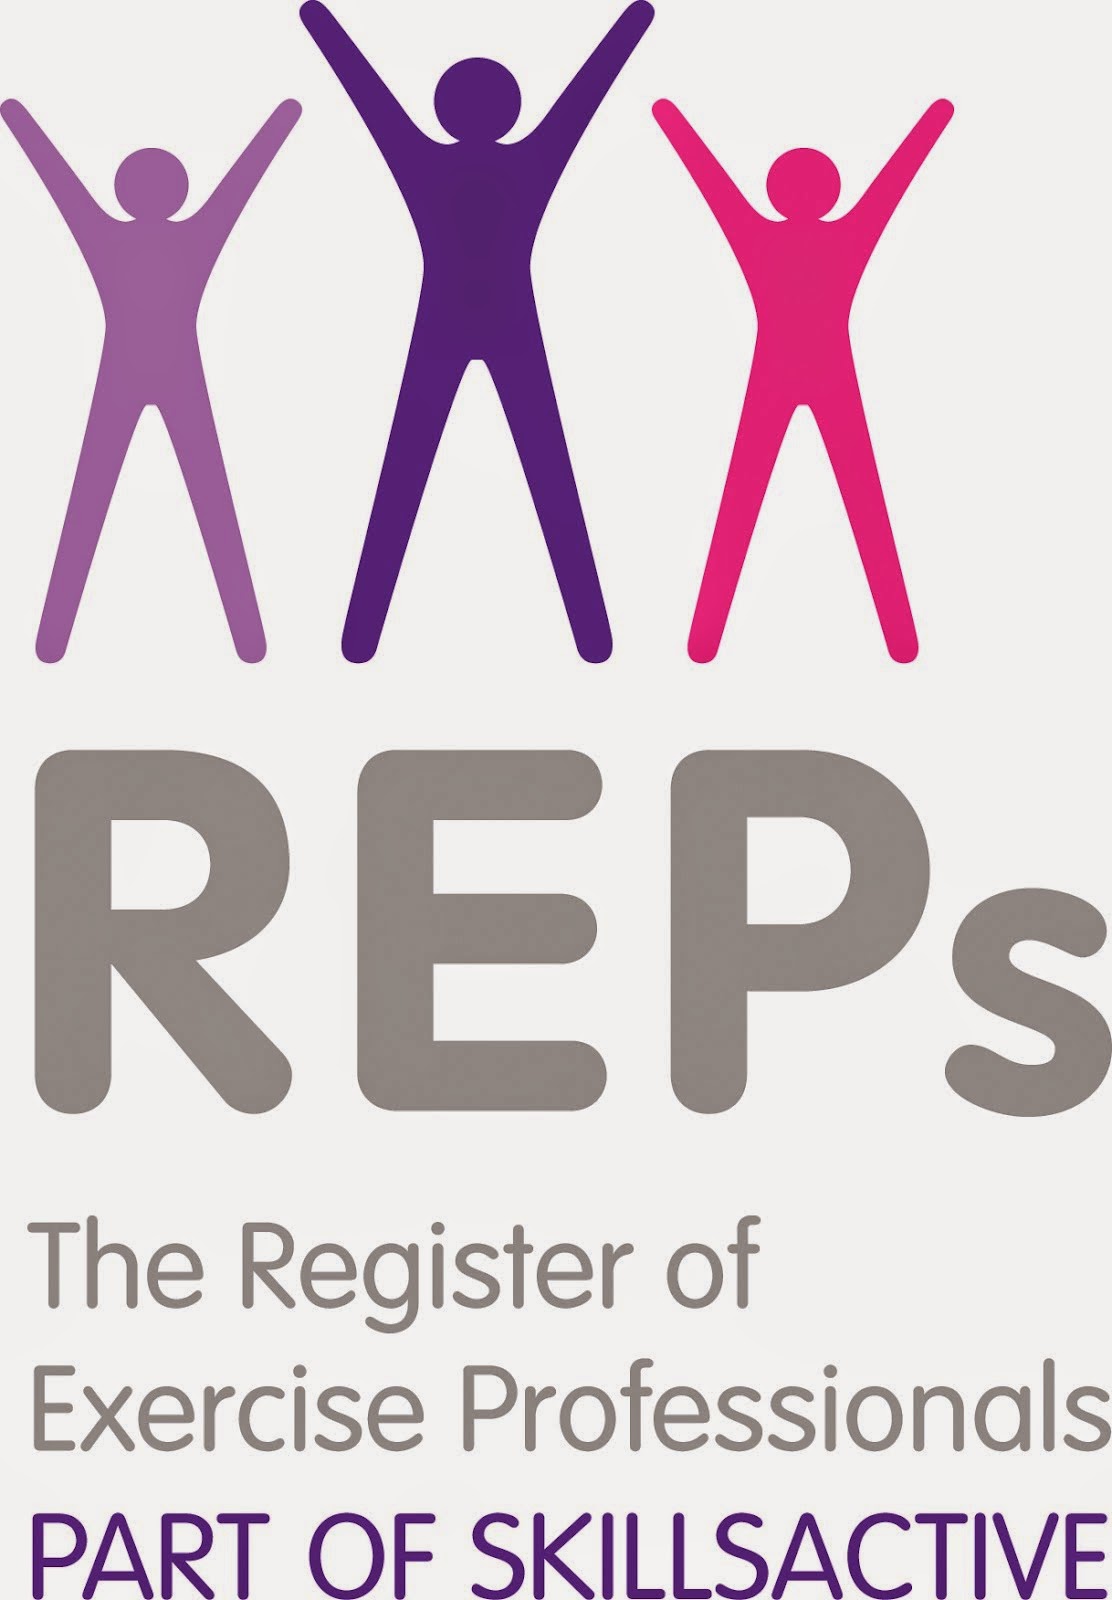 I'm a Registered Exercise Professional